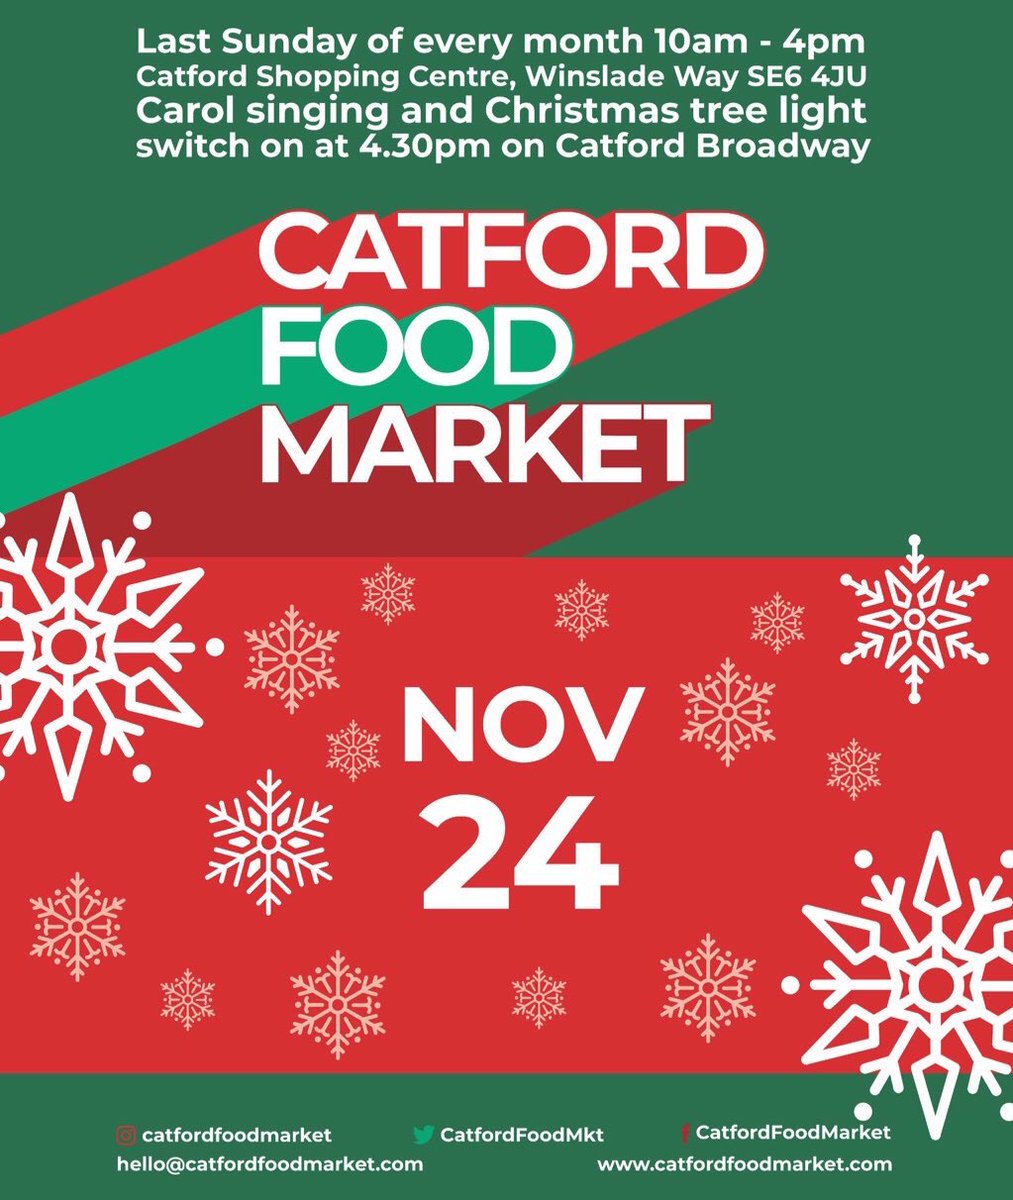 See you all tomorrow 😋👨🏾‍🍳👩🏻‍🍳 last one of the year! Also we’ve got 1 more hot surprise for tomorrow 🔥🔥10-4pm @jerkoffBBQ come early! 
#catfordfoodmarket #se6 #festivemarket #timeoutlondon #foodies